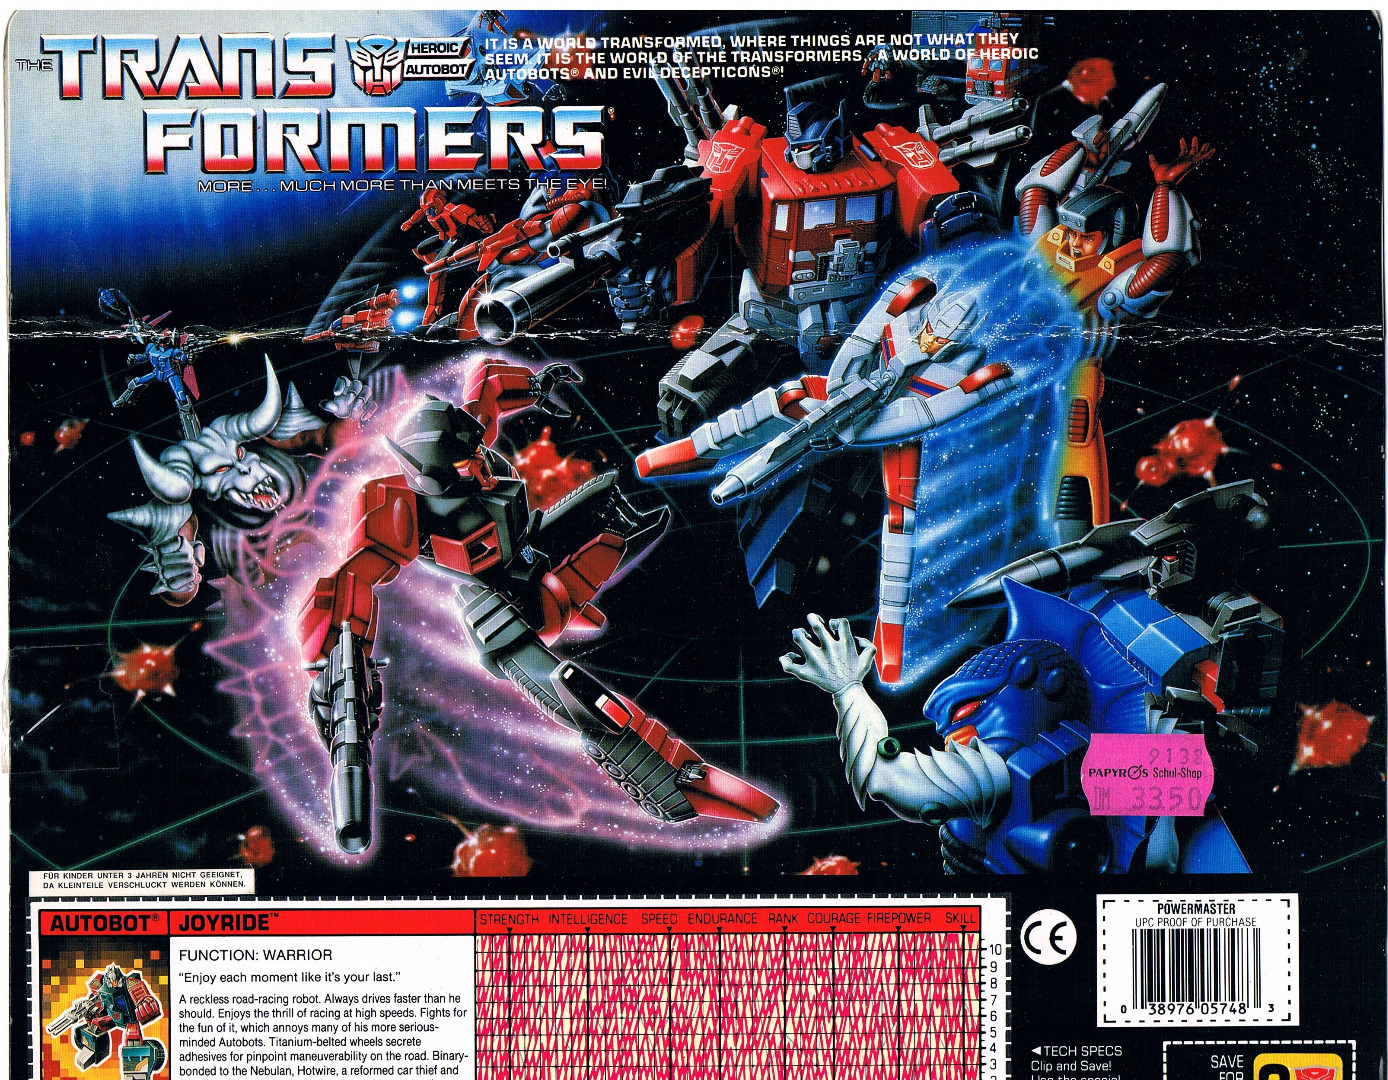 Info page 80s/90s Toys - 33 pictures of packaging & advertising